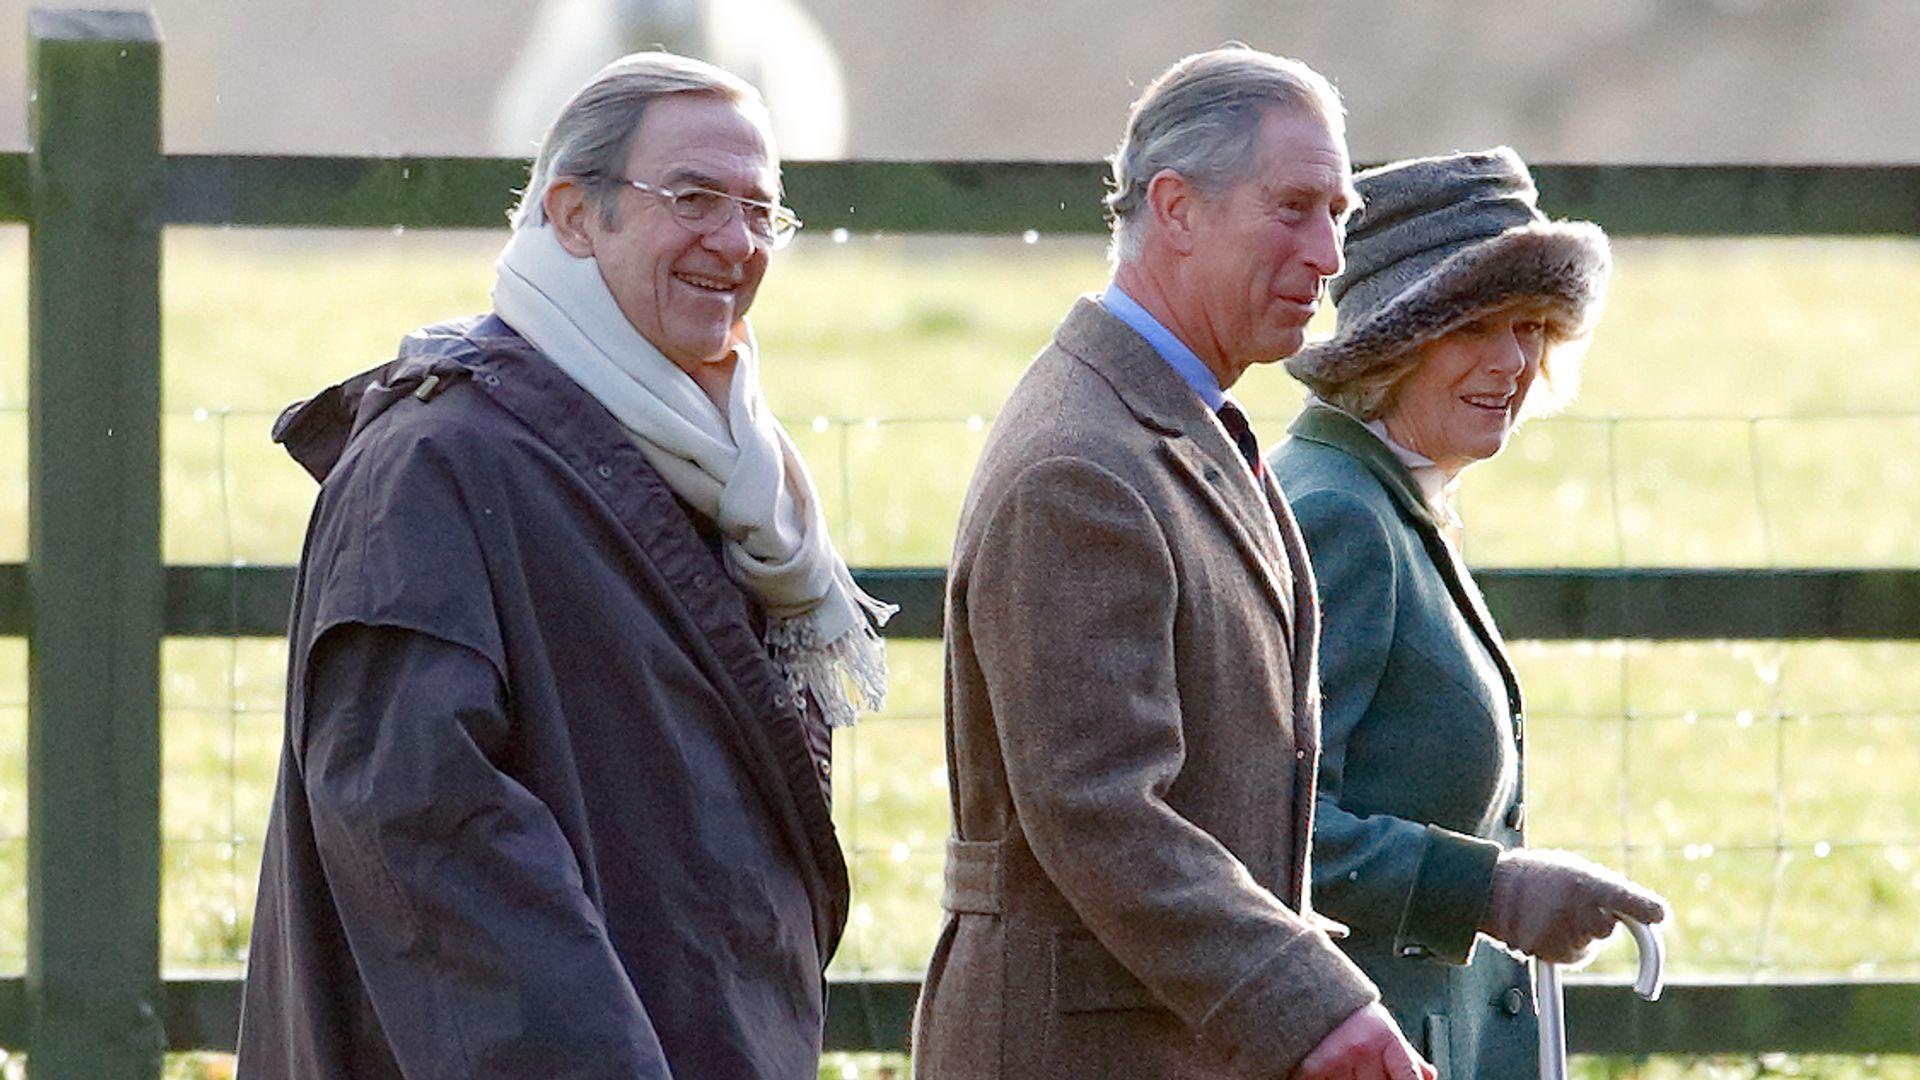 King Constantine, Prince Charles and Duchess of Cornwall attend church in Sandringham in 2007